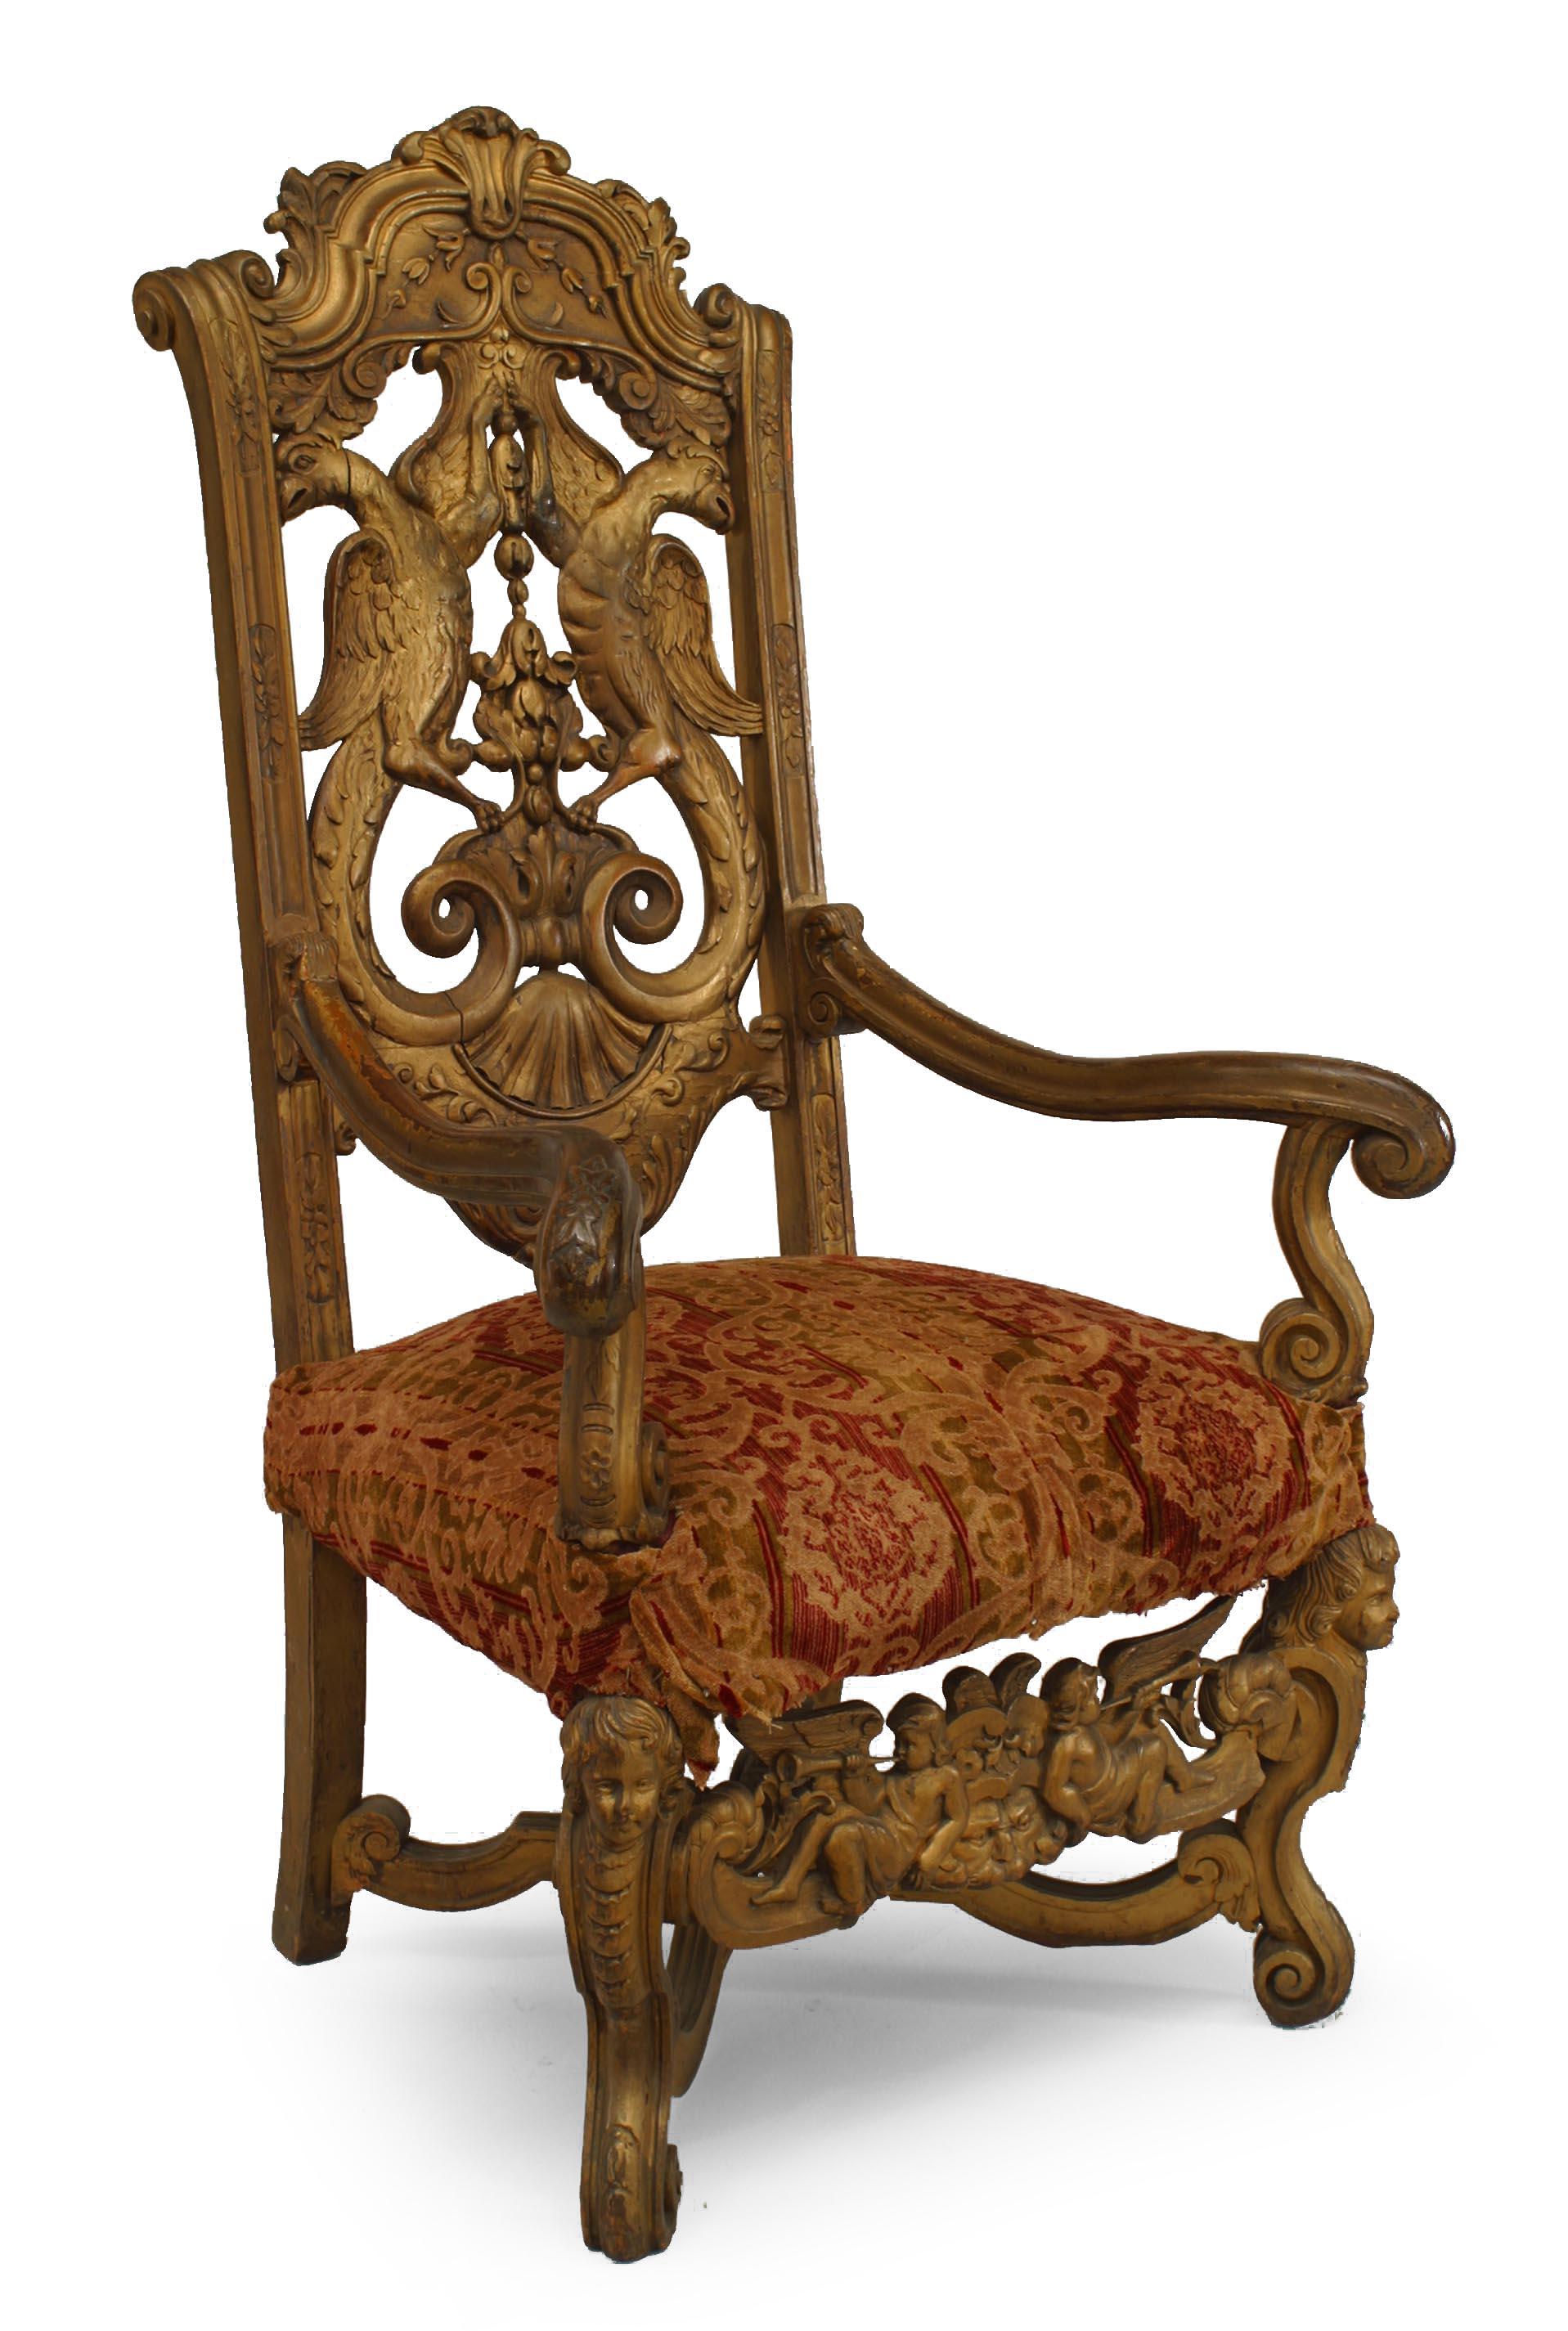 Pair of Italian Rococo style gilt high back carved eagle back armchairs with cupid stretcher and upholstered seat, 19th-20th century.